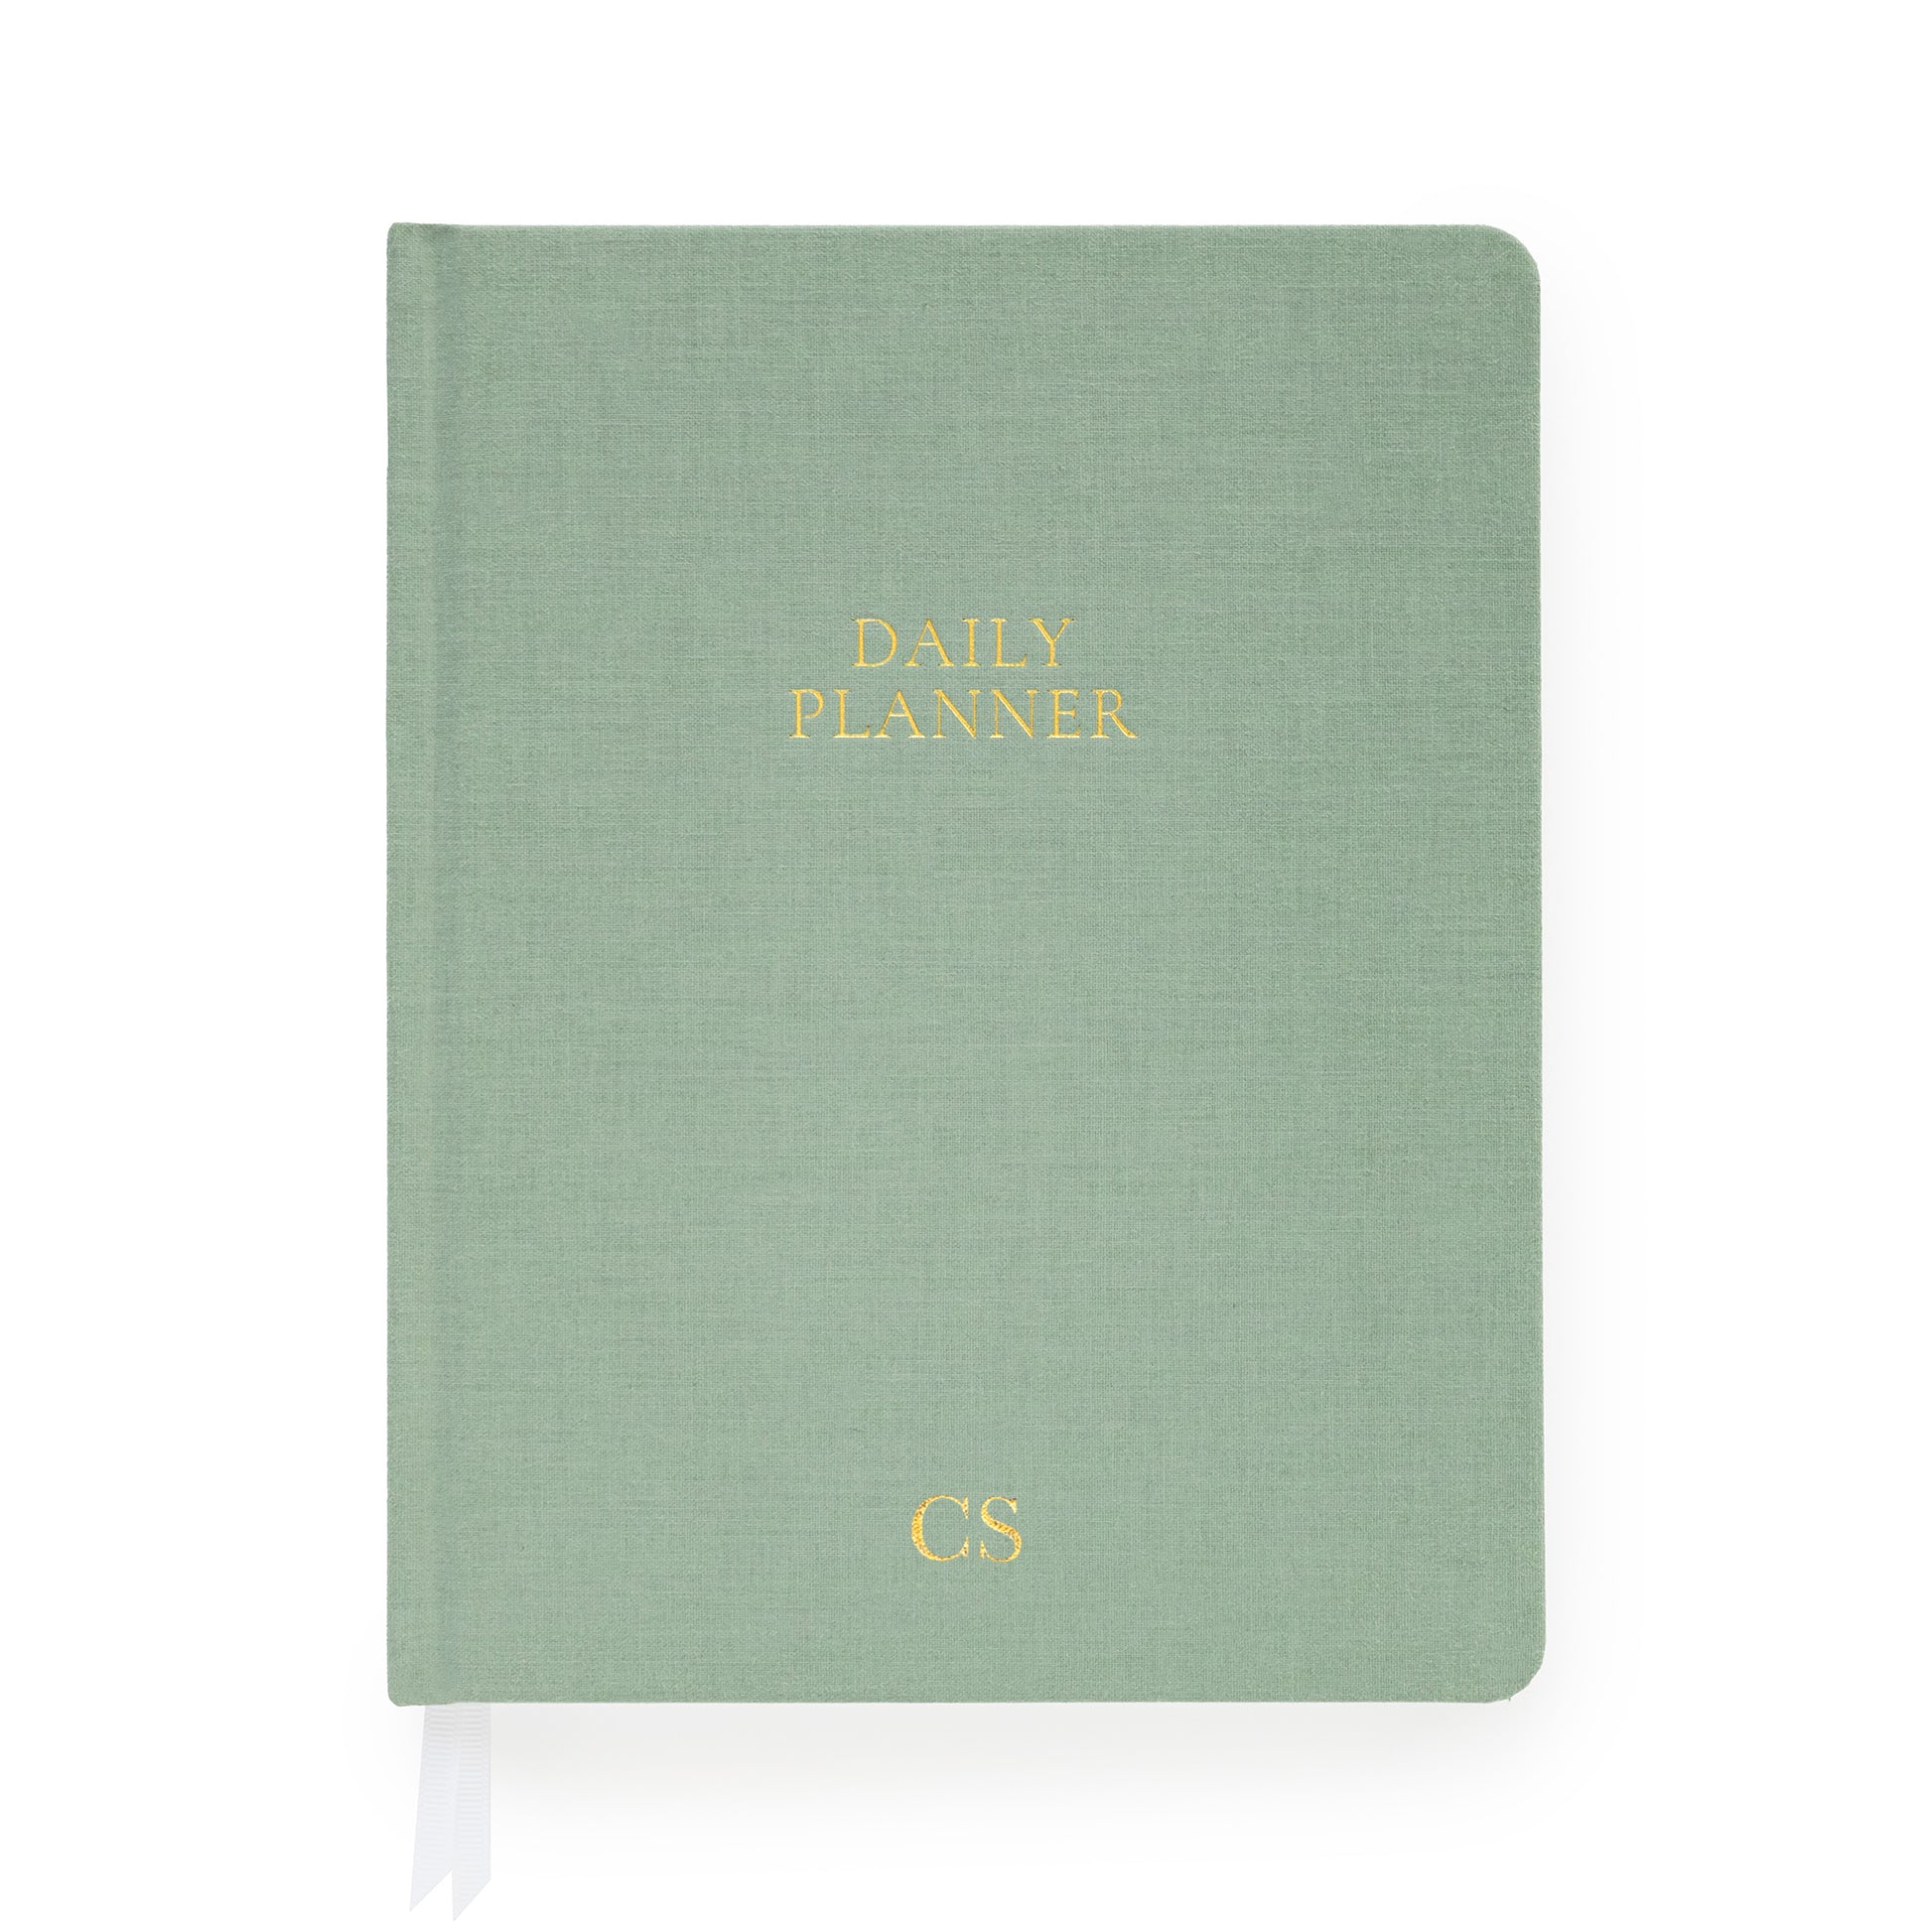 Sage green daily planner with gold foil initials